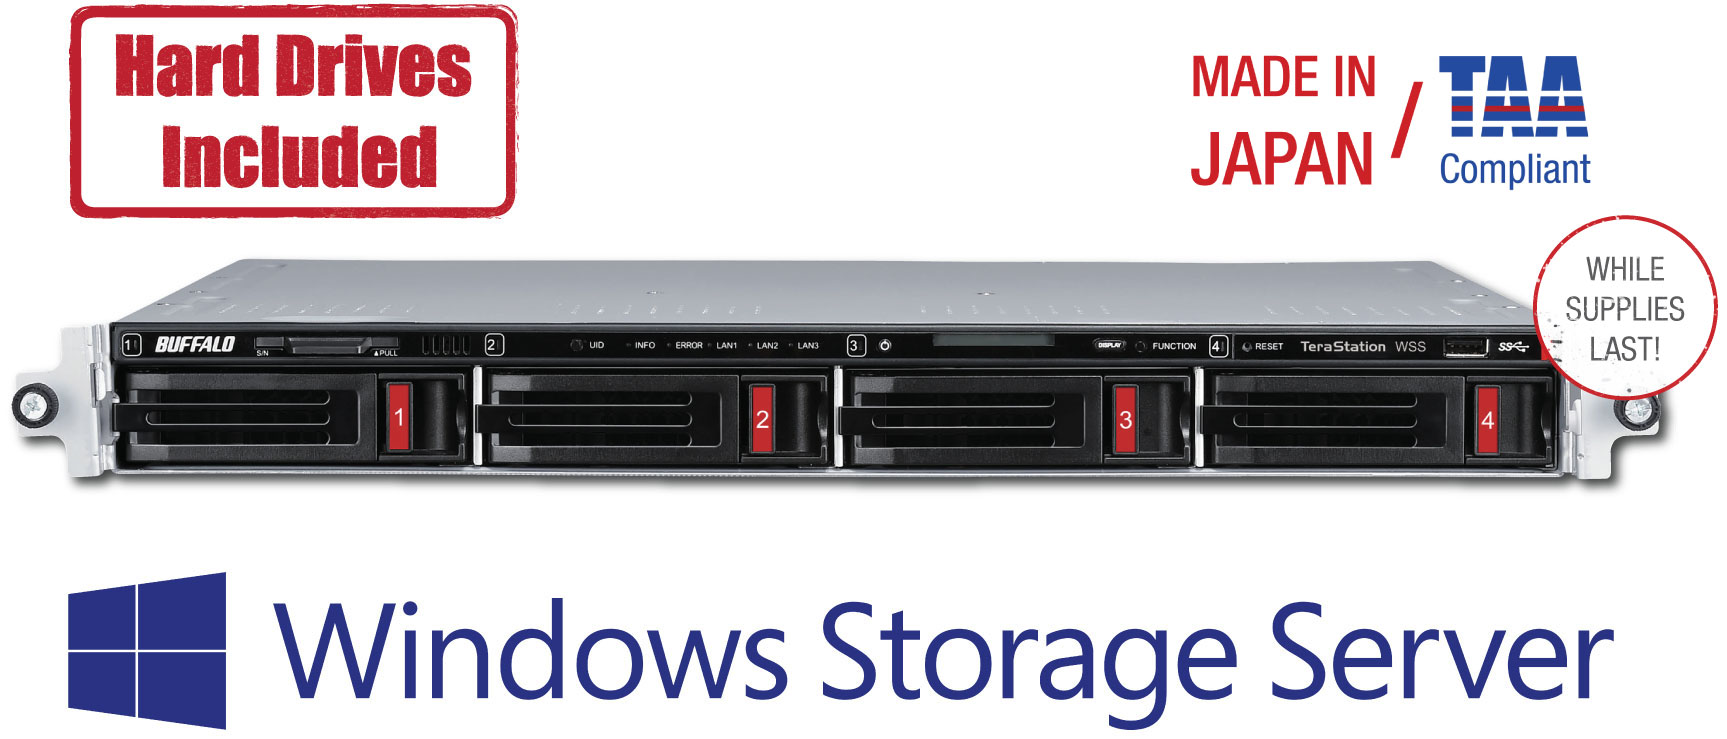 Halvkreds Forbyde Gutter Windows Storage Server 2016 with Network Storage Solution with Hard Drives  Included | Buffalo Americas